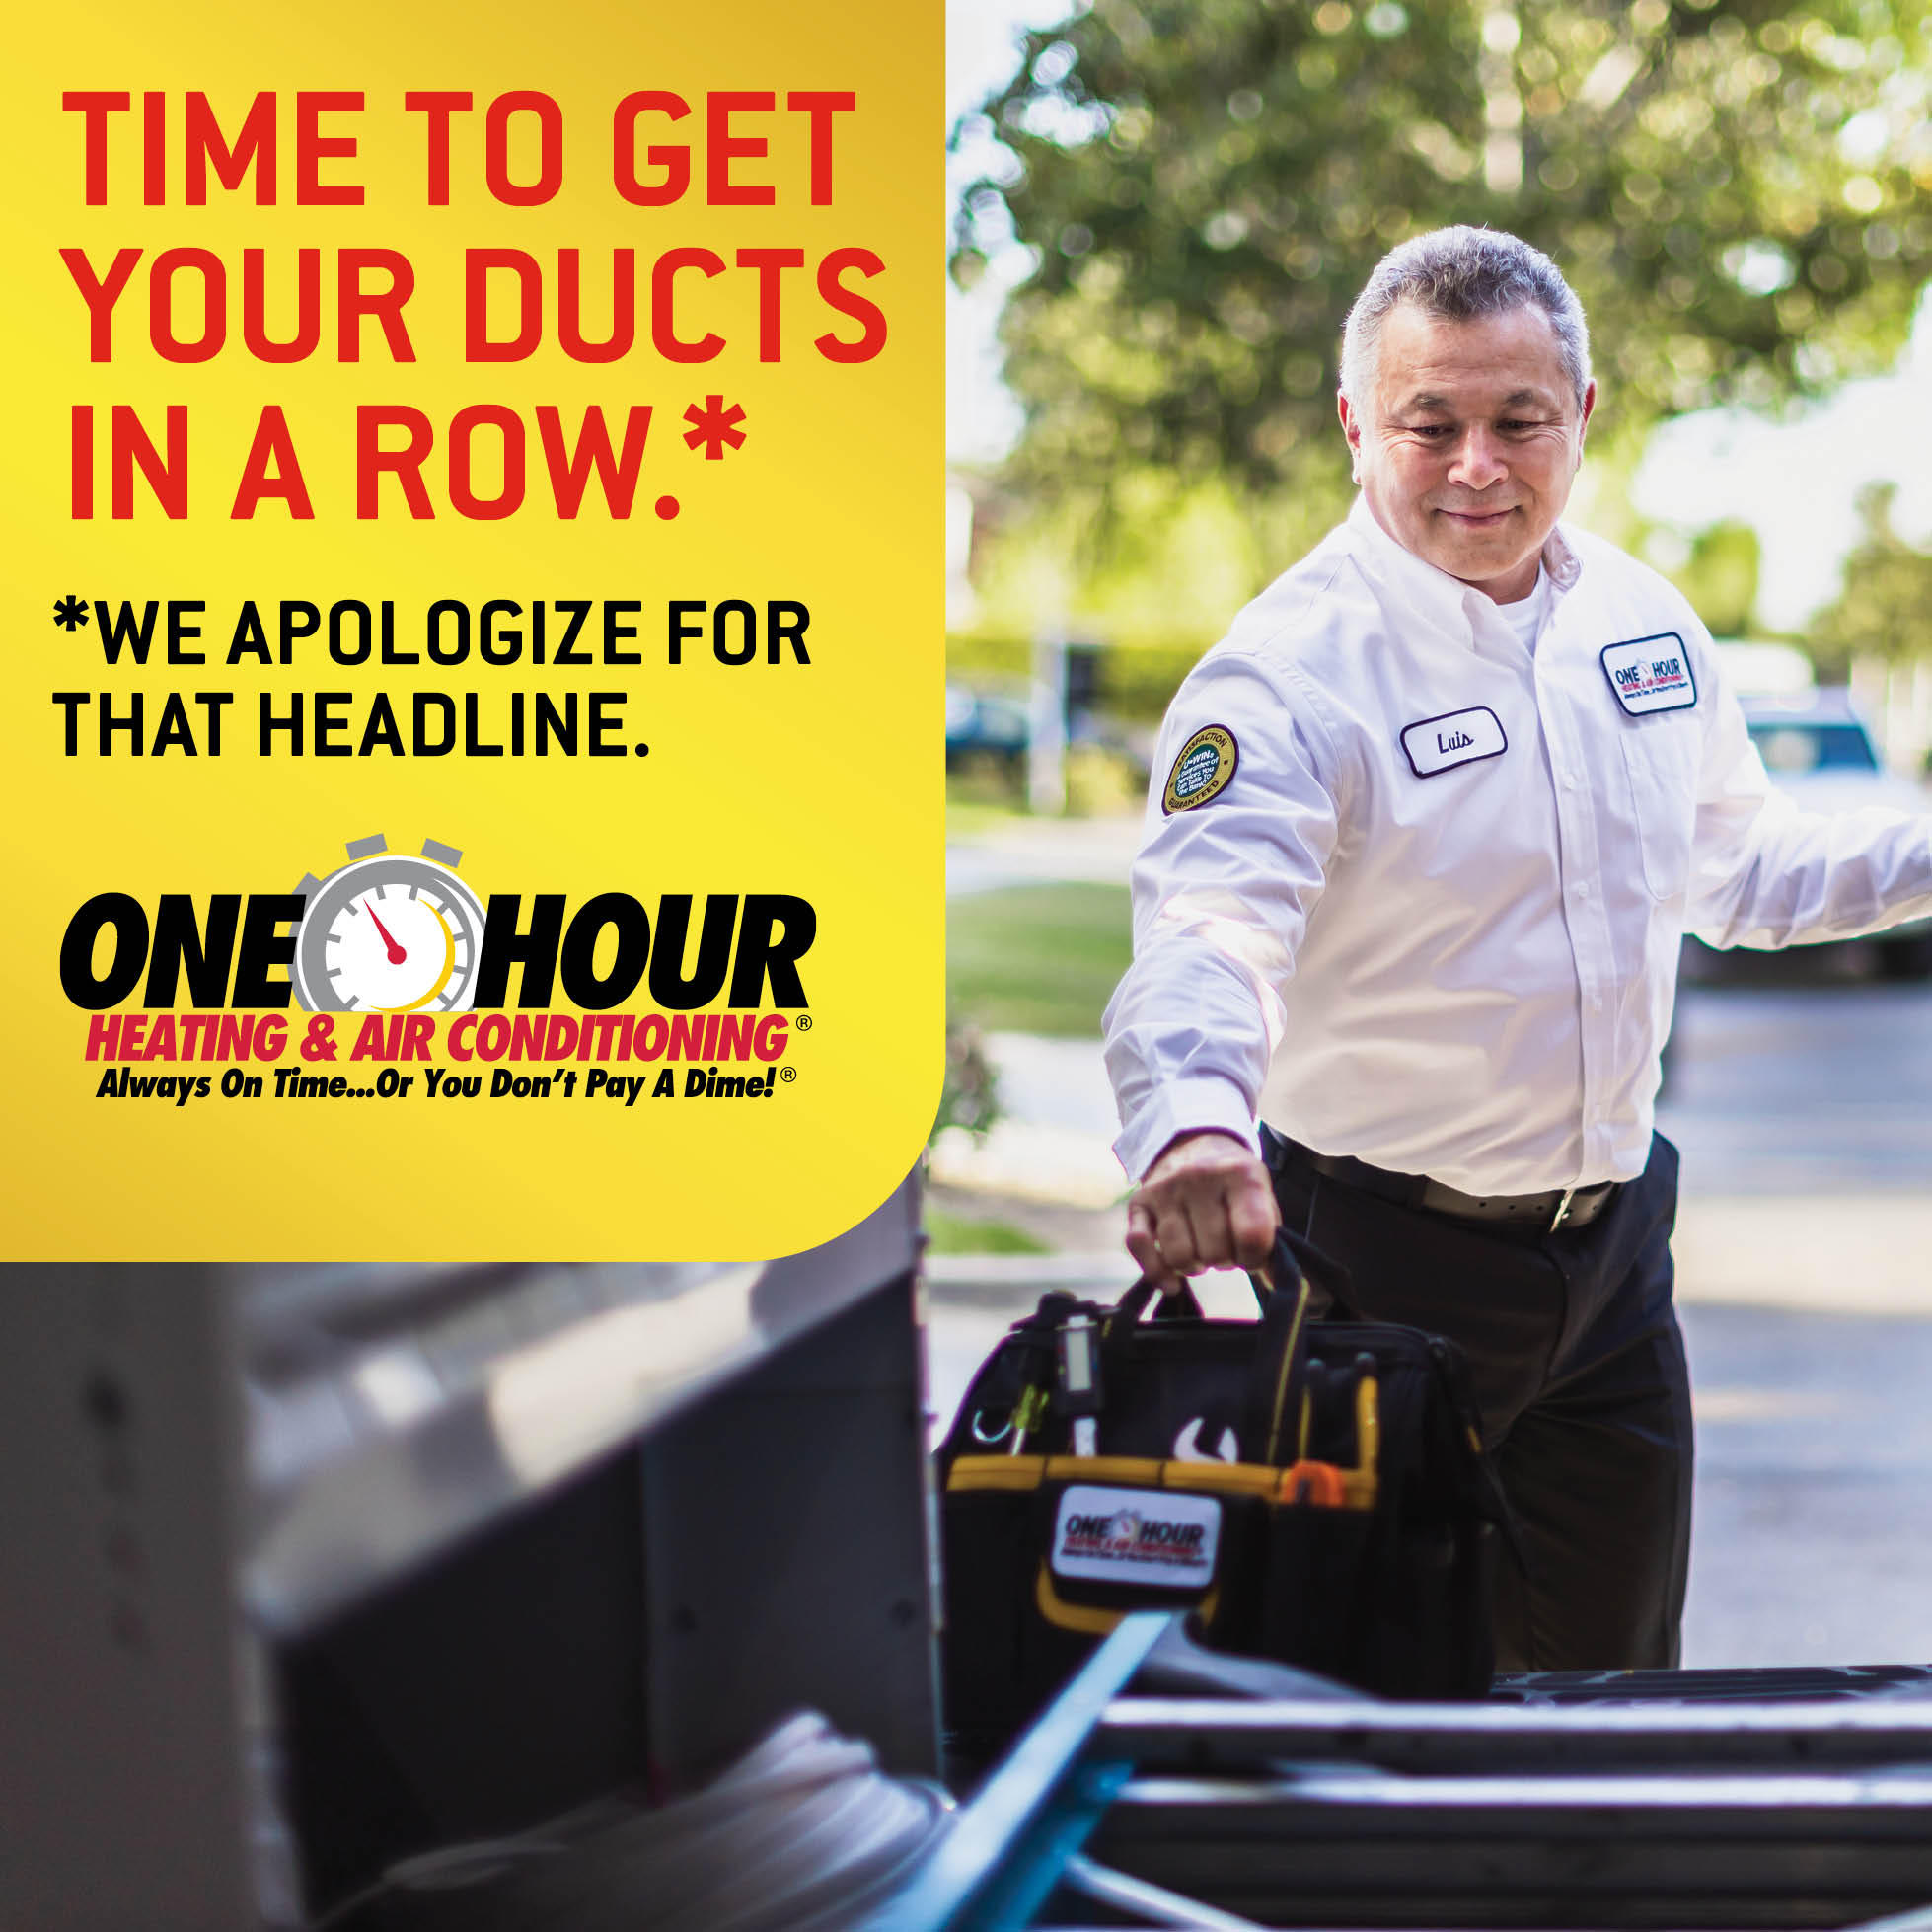 One Hour technician getting his toolbox out of the back of the van with the text Time to get your ducts in a row.  We apologize for that headline | One Hour Heating & Air Conditioning |  Proudly serving  Cedar Park, Leander, Liberty Hill, & Lago Vista, TX and surrounding areas